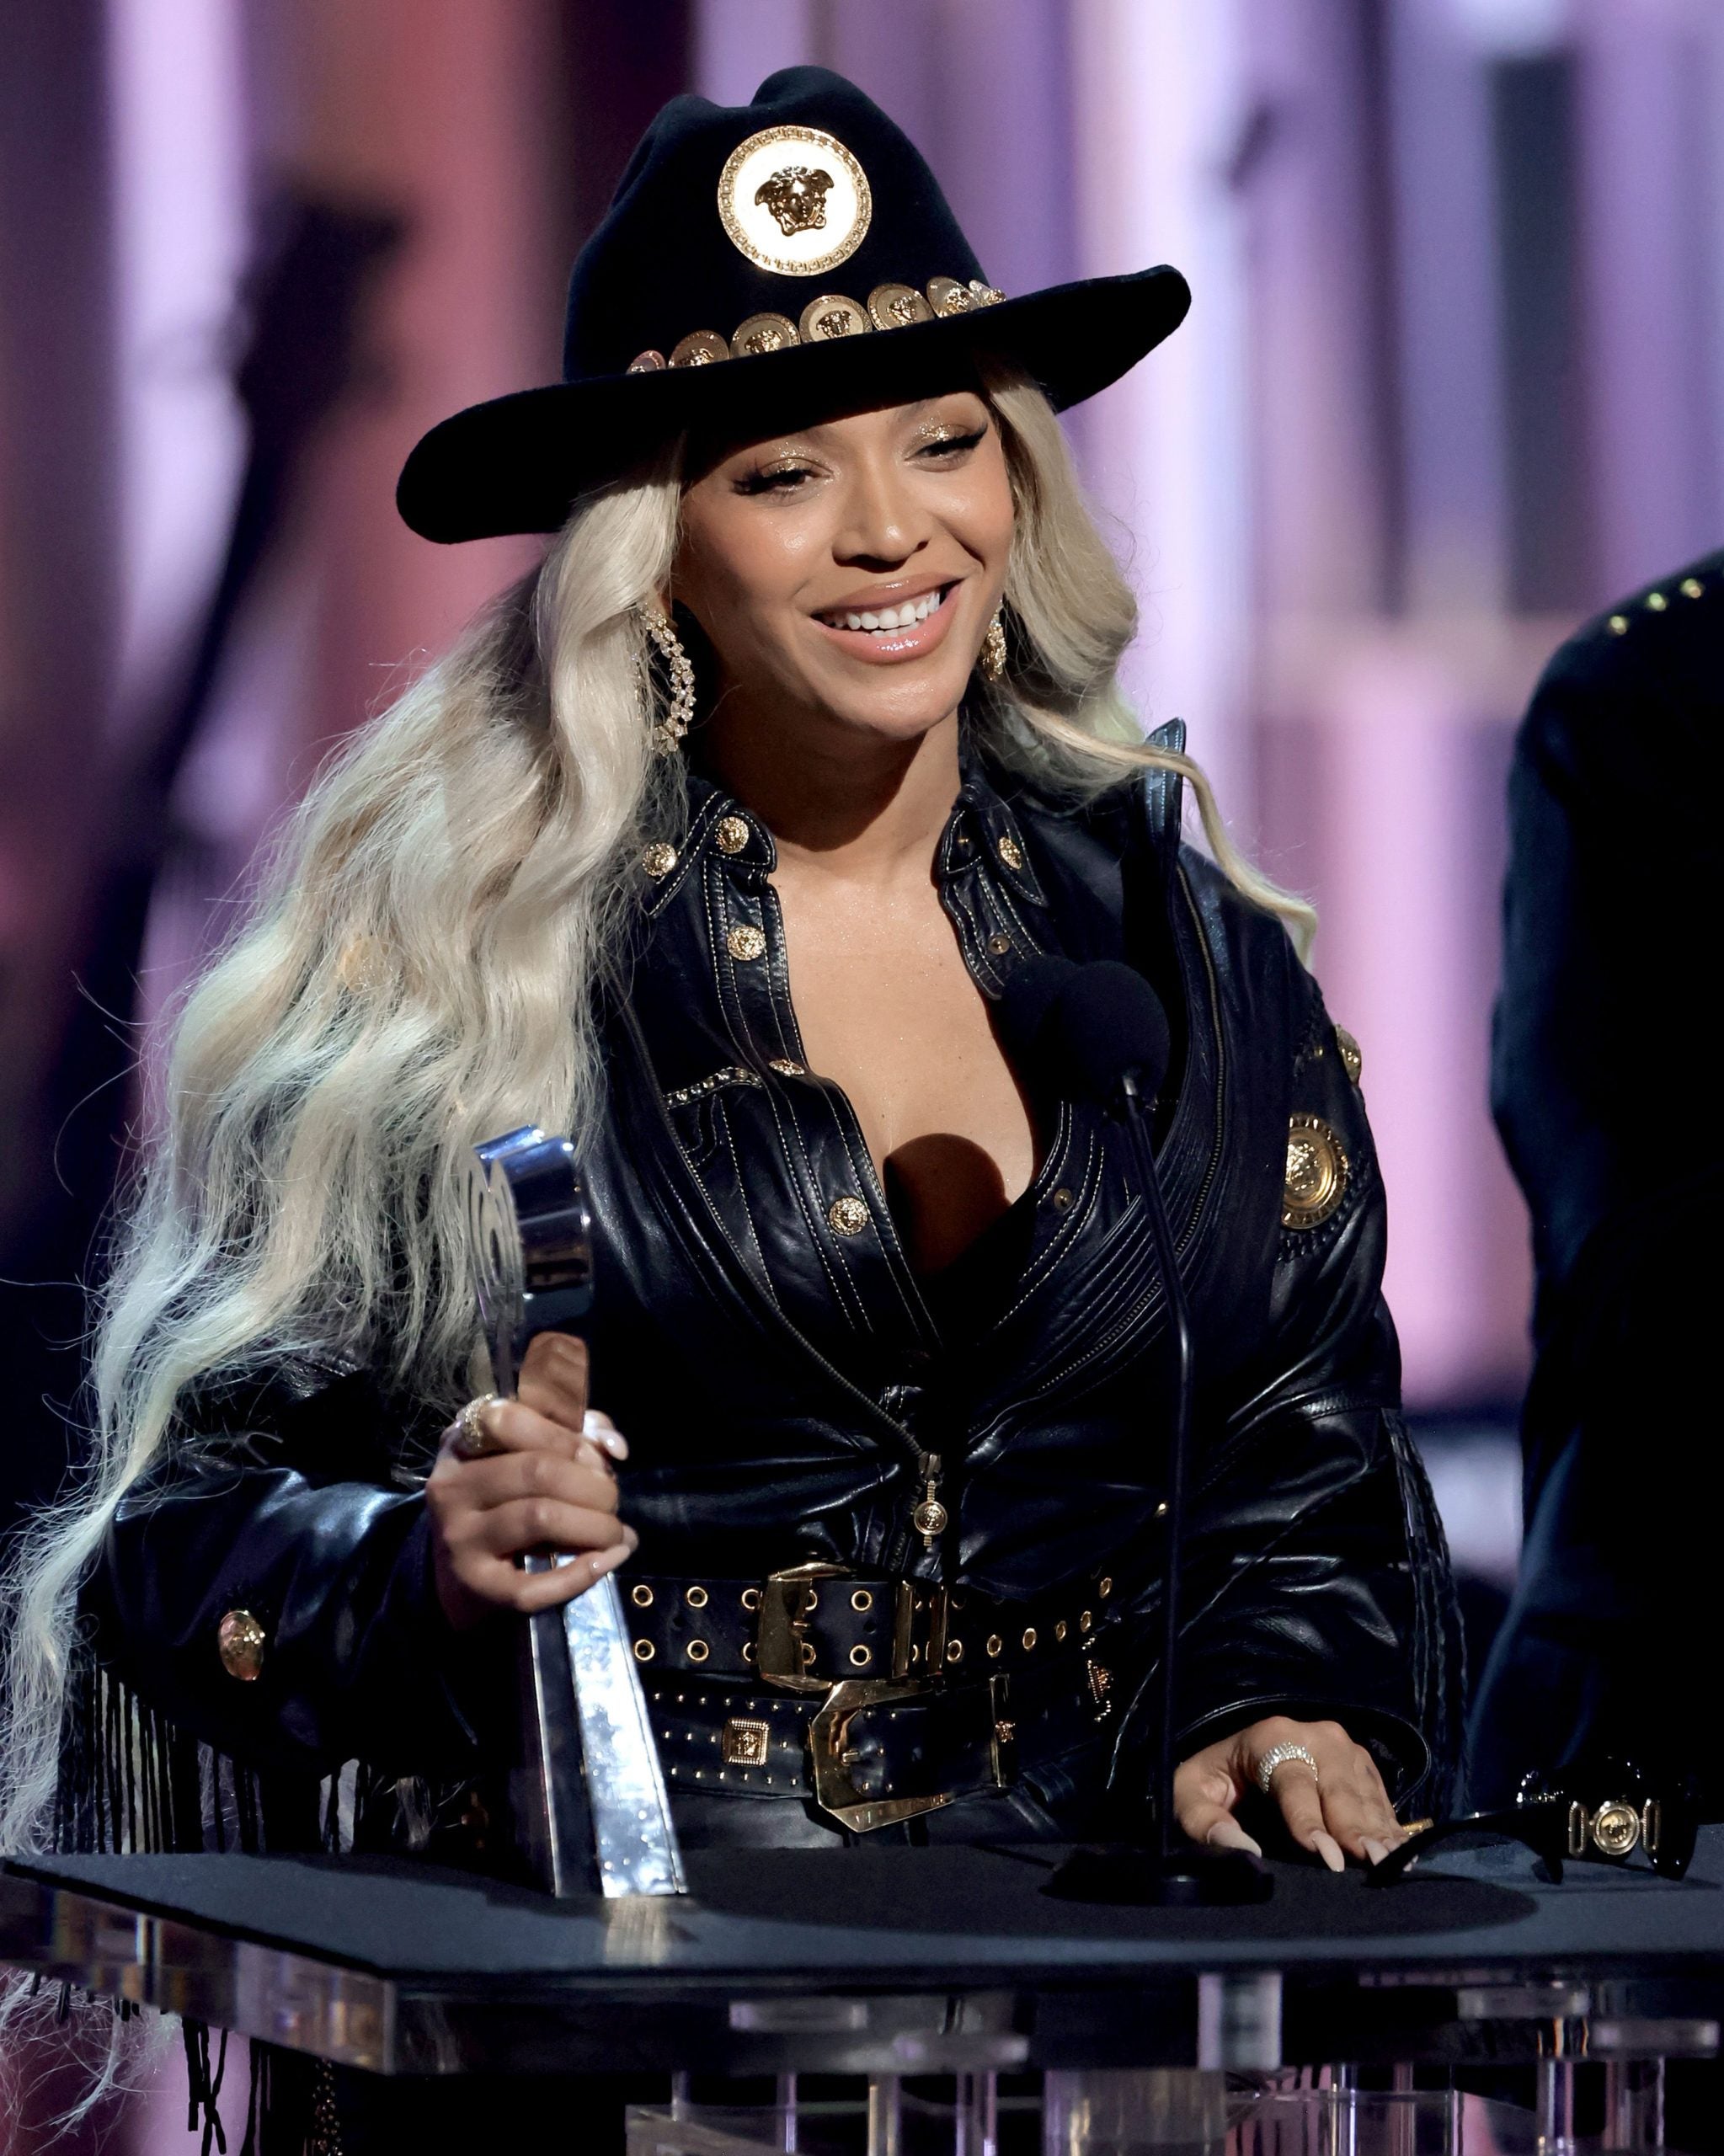 Beyoncé Wore A Cowboy-Themed Look To The iHeartRadio Awards